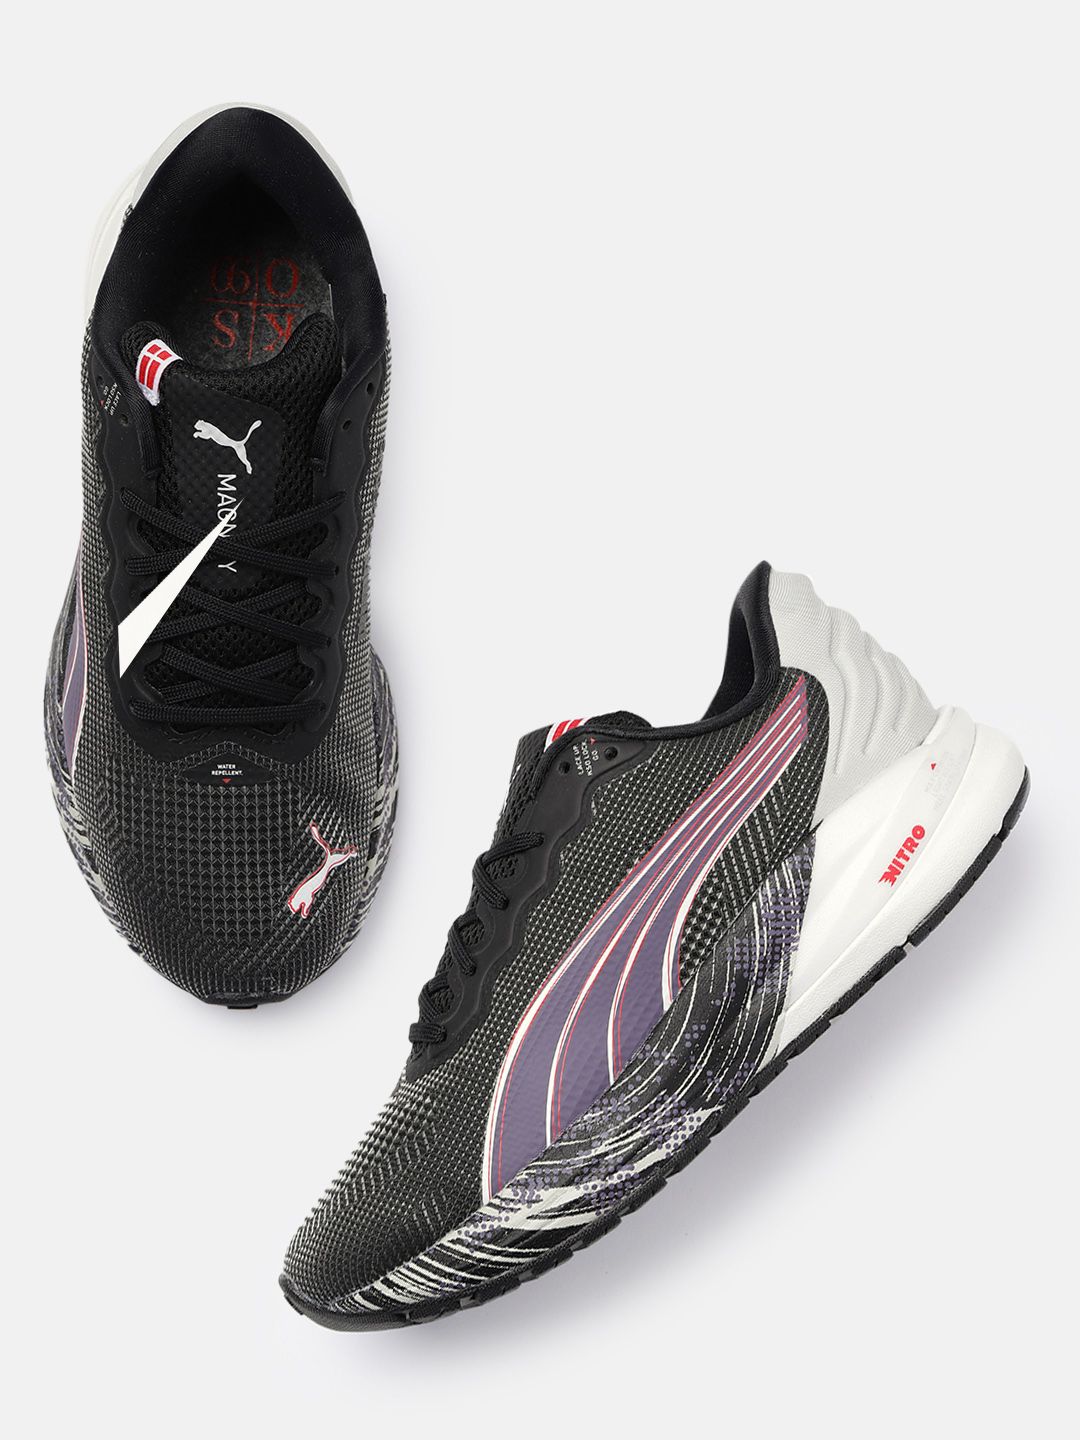 Puma Women Textured Magnify Nitro KSO Road Running Shoes Price in India